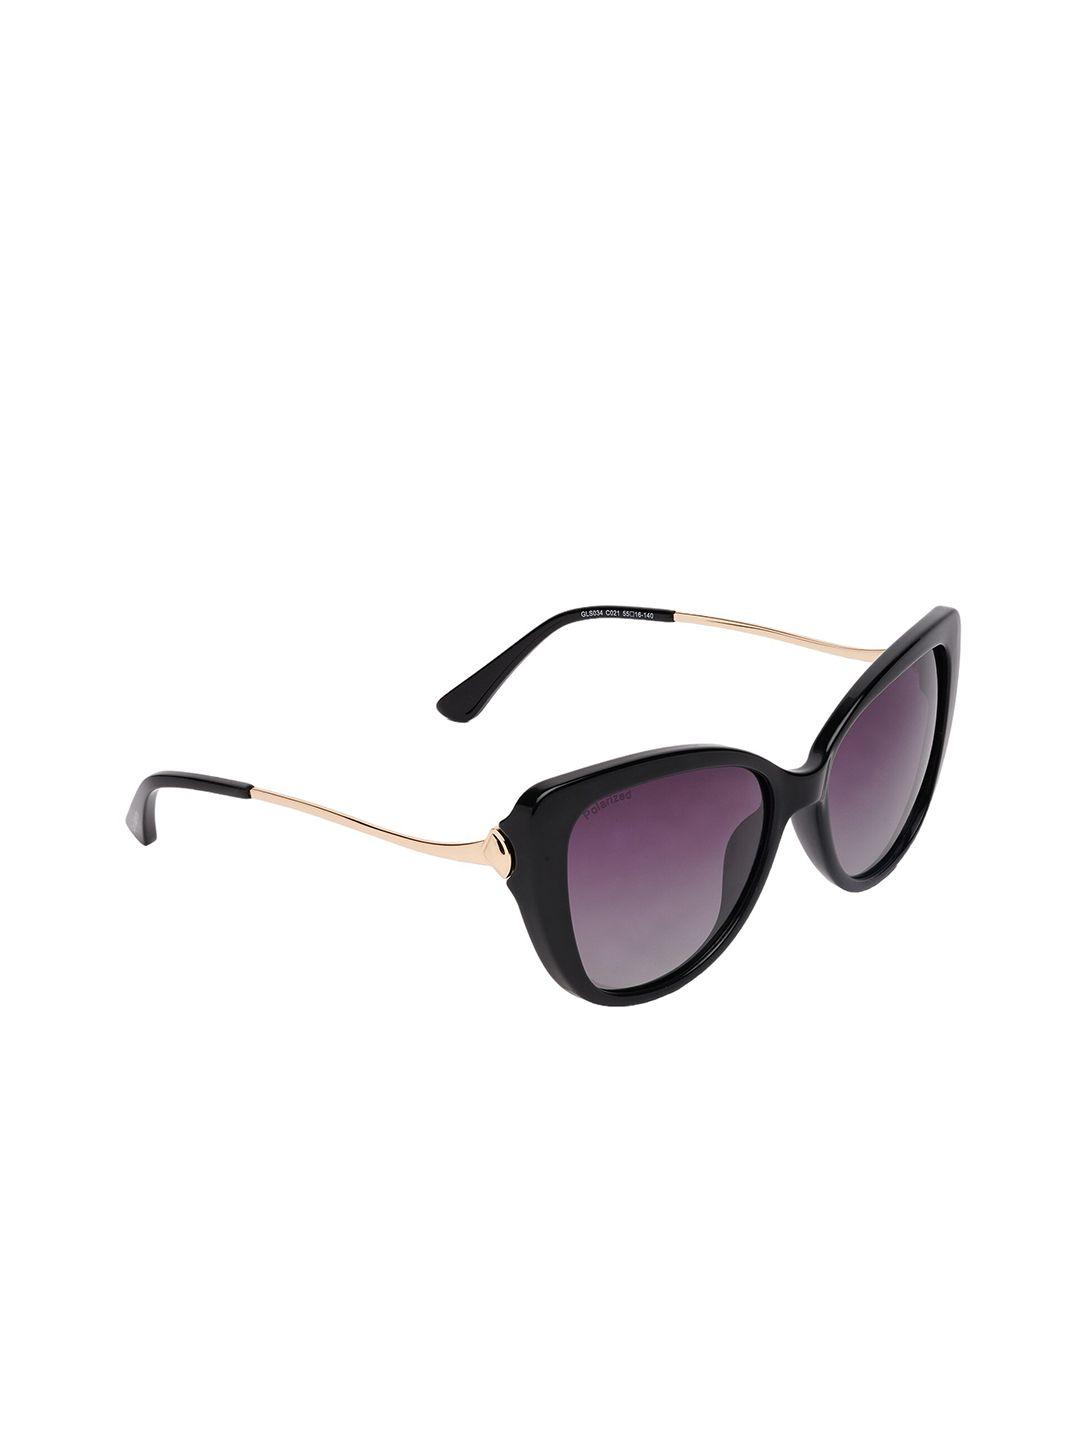 guy laroche women butterfly sunglasses with uv protected lens